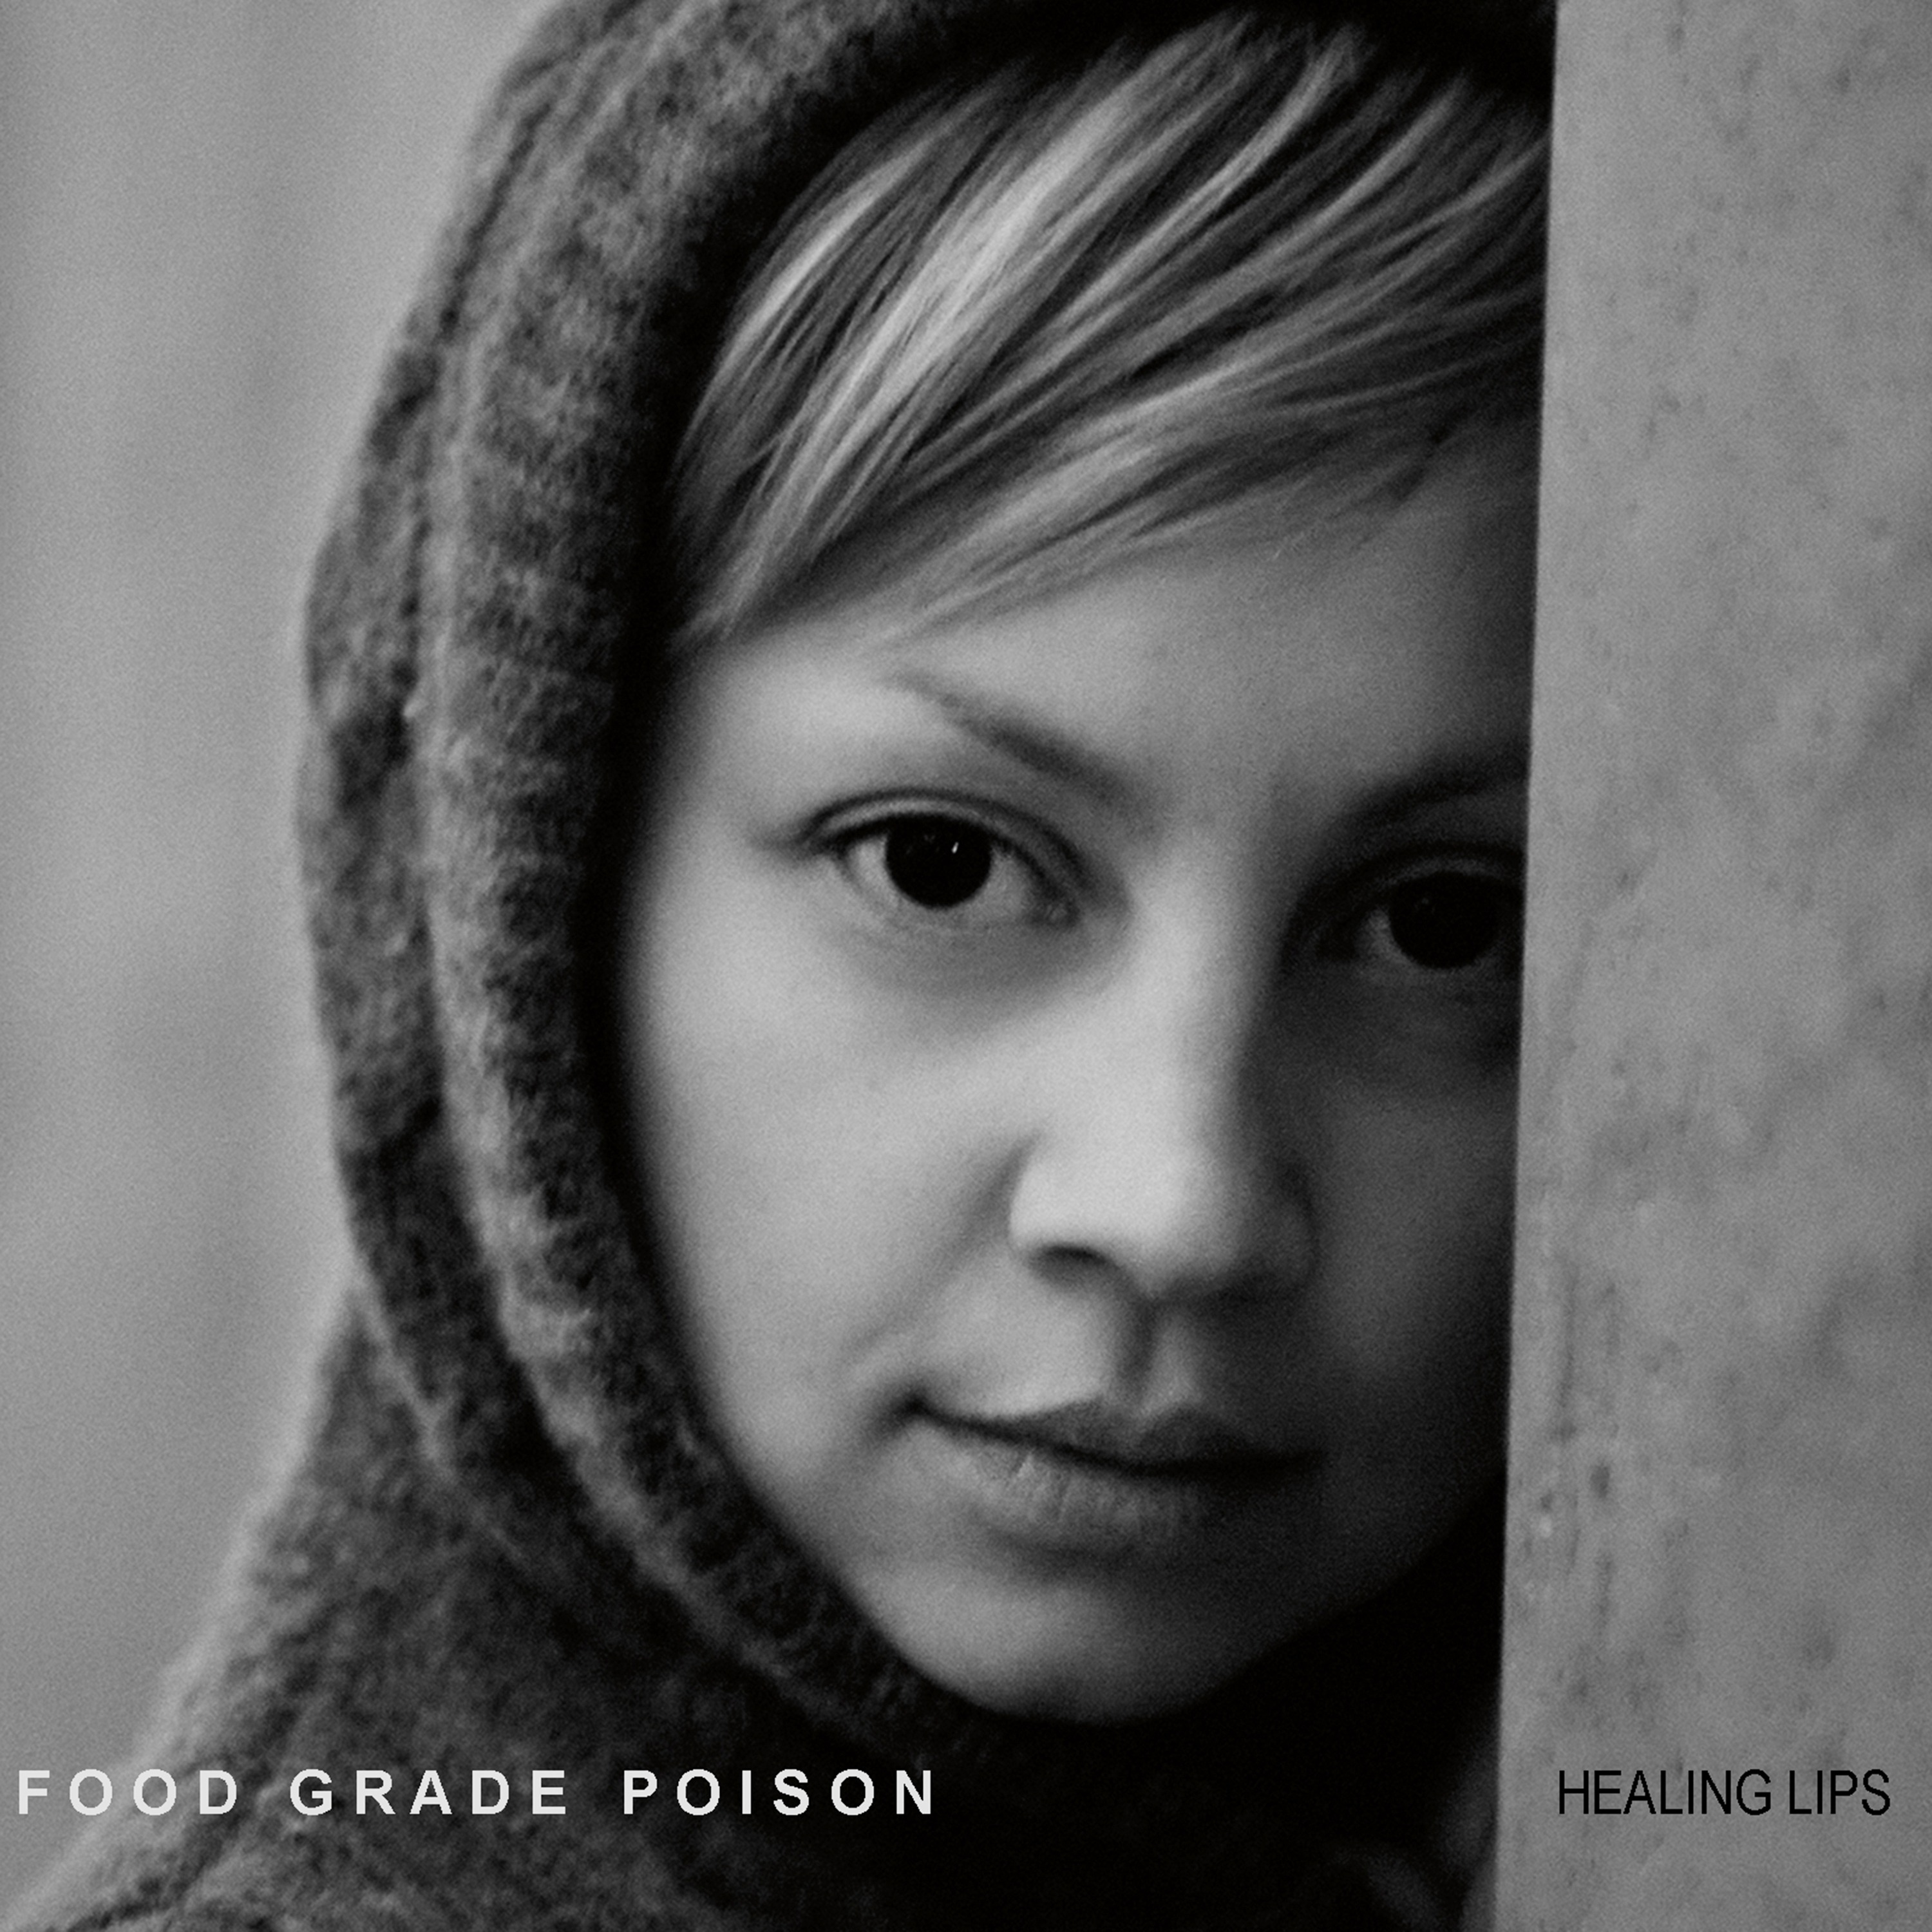 Music Teeming With Uniqueness And Promise: Food Grade Poison Produces Music That Has Both Depth and Vision.